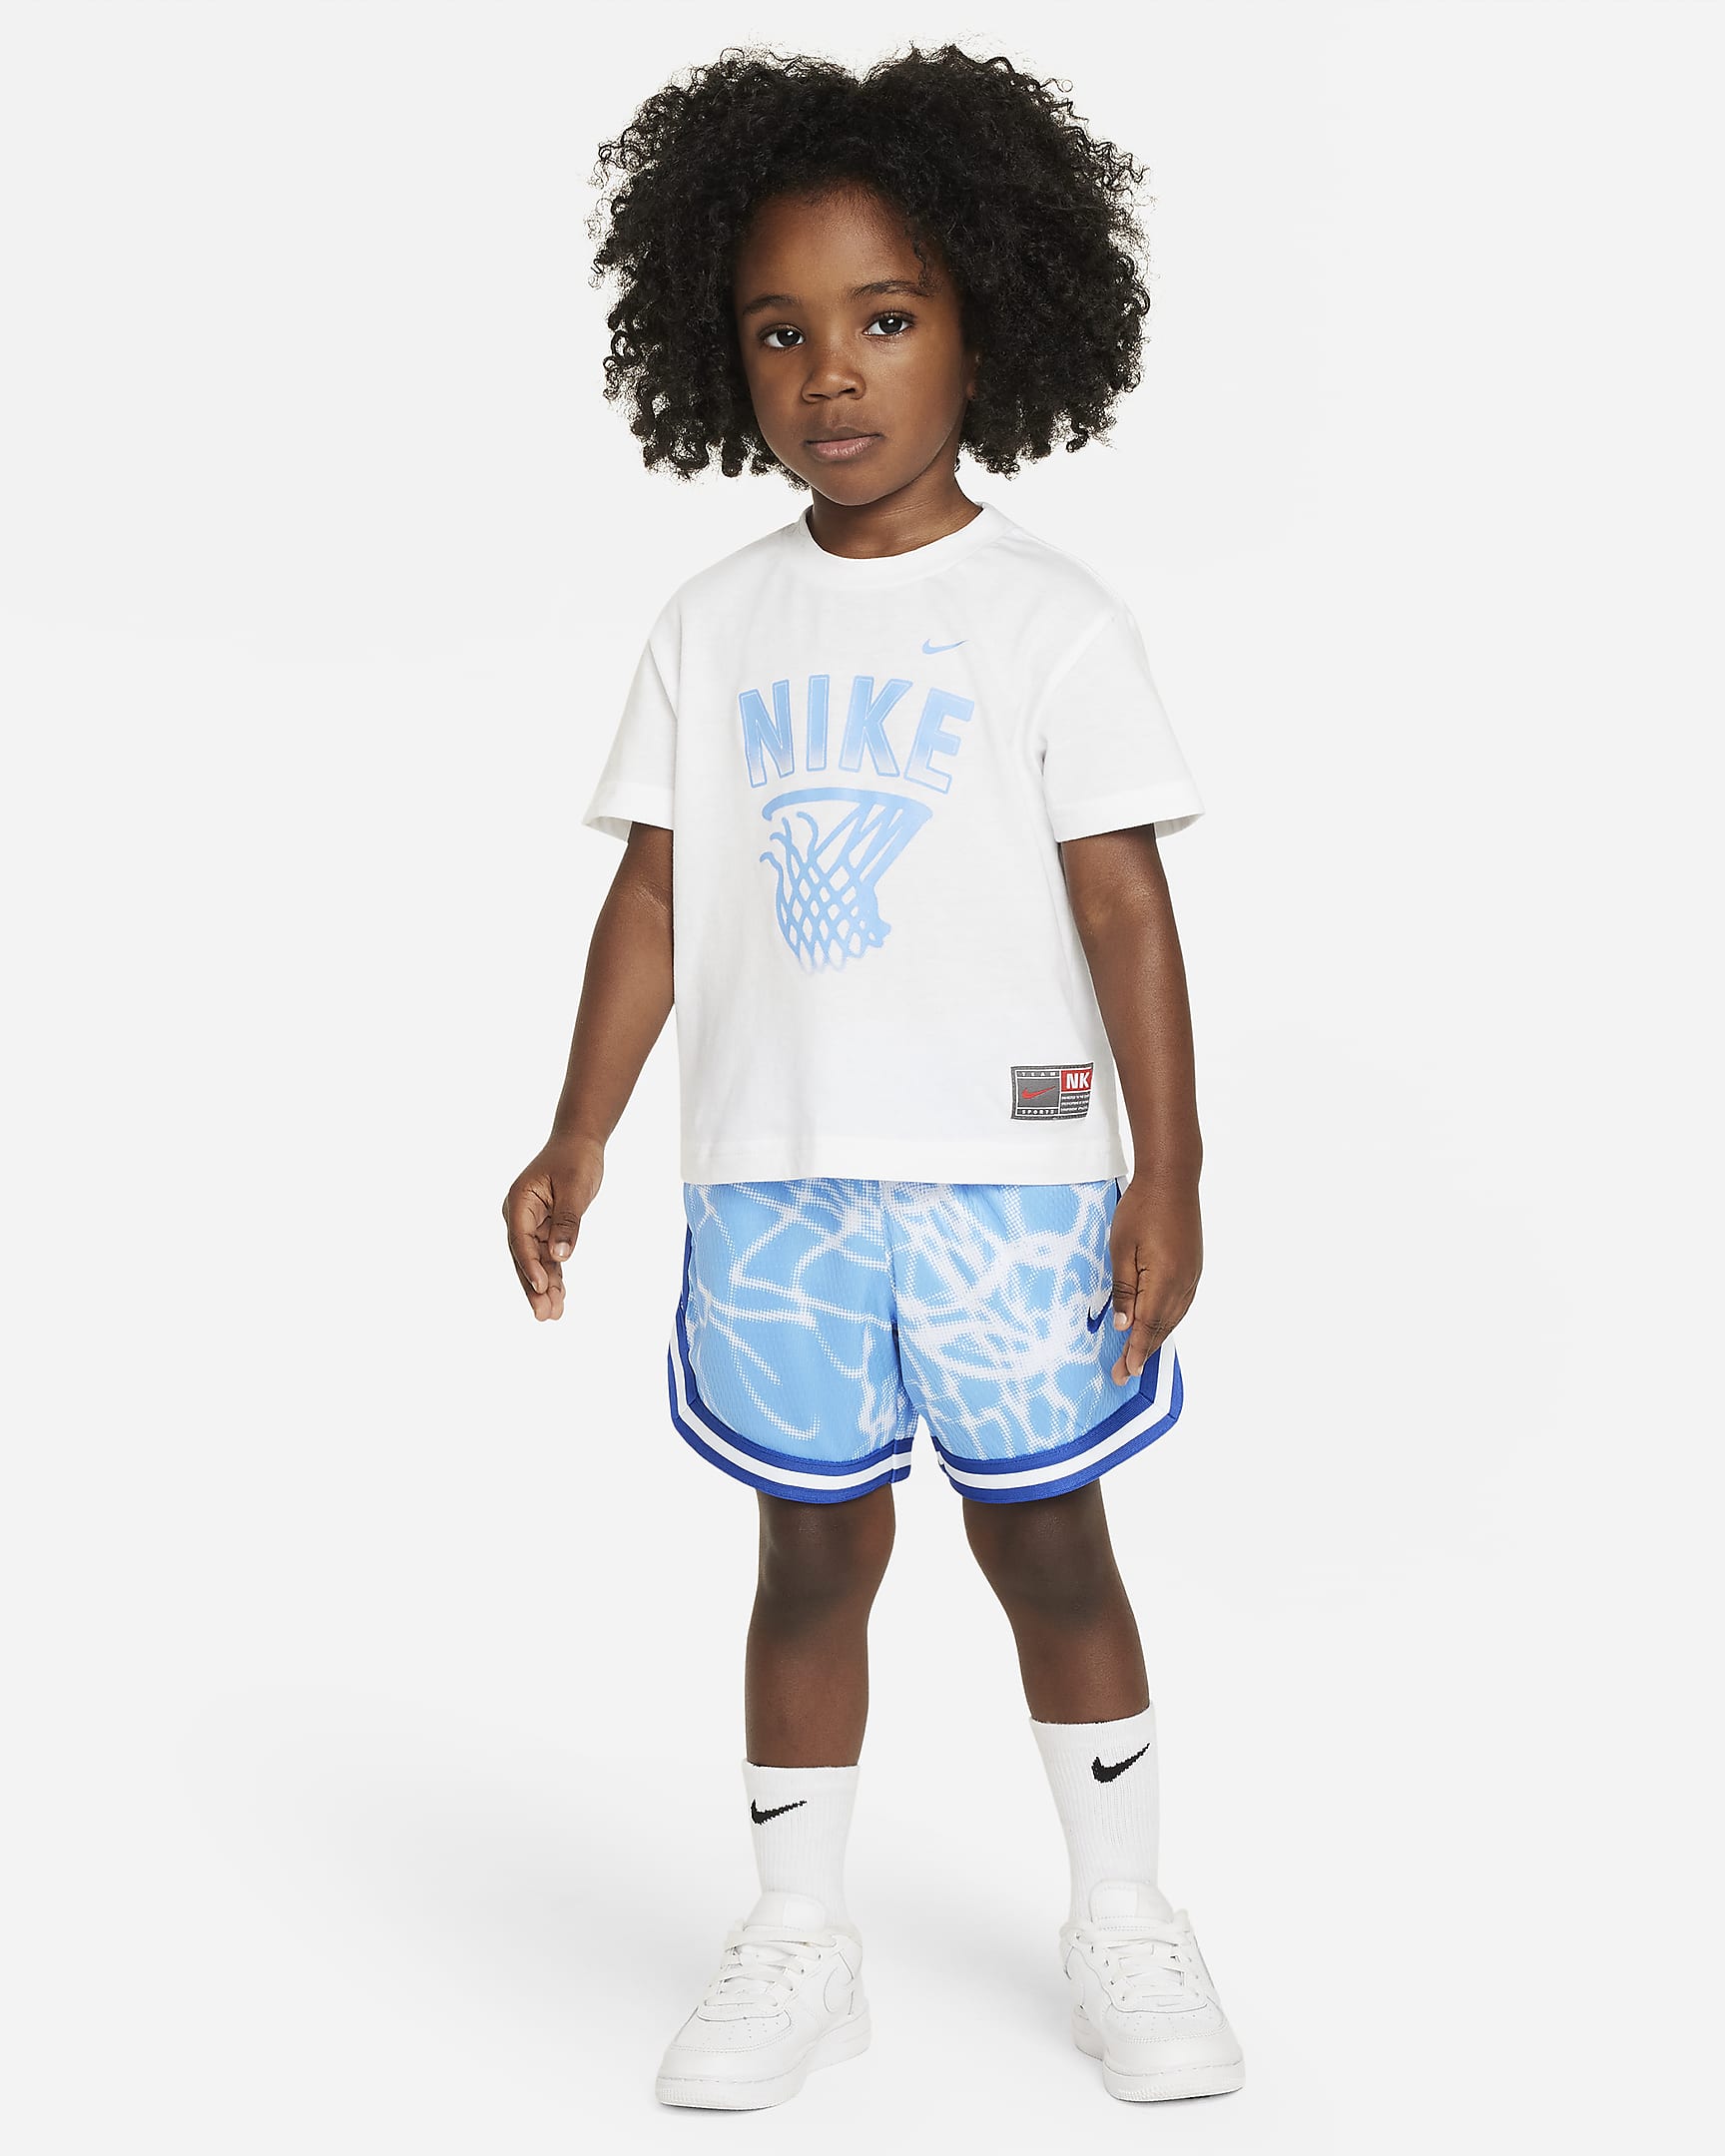 Nike Dri-FIT Culture of Basketball Toddler 2-Piece Mesh Shorts Set ...